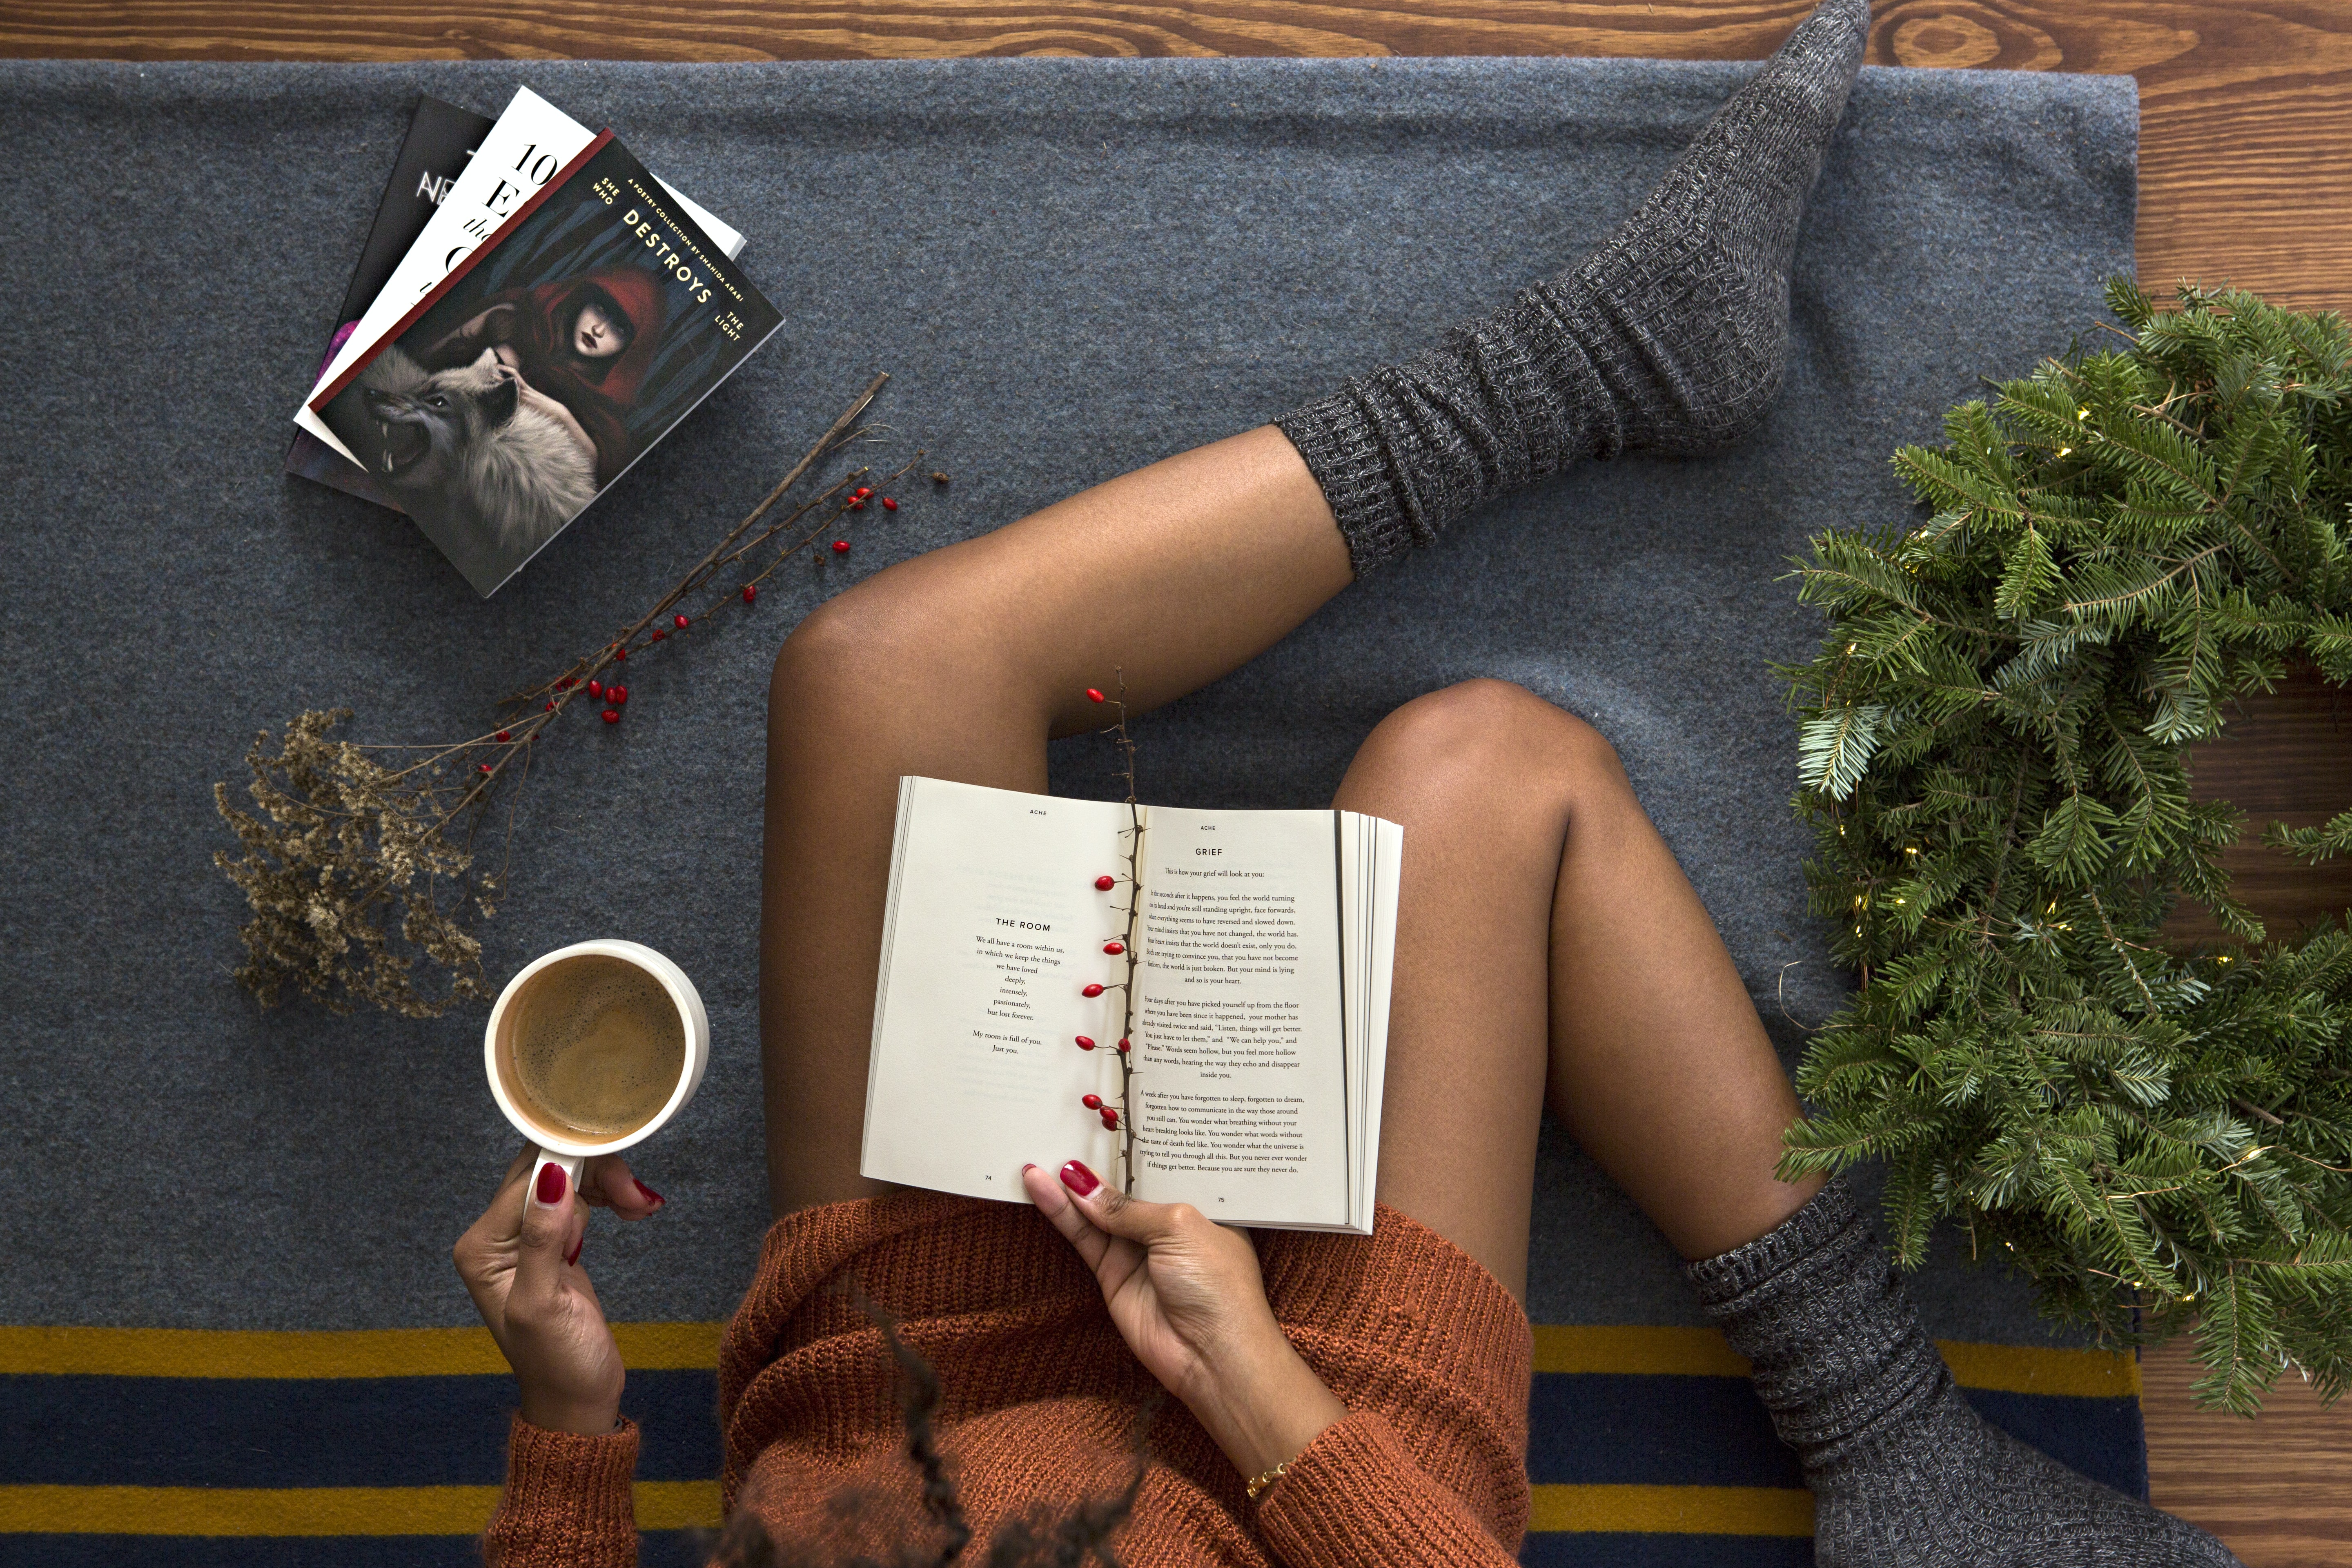 opened book on person's lap with gray socks - christmas-themed novels